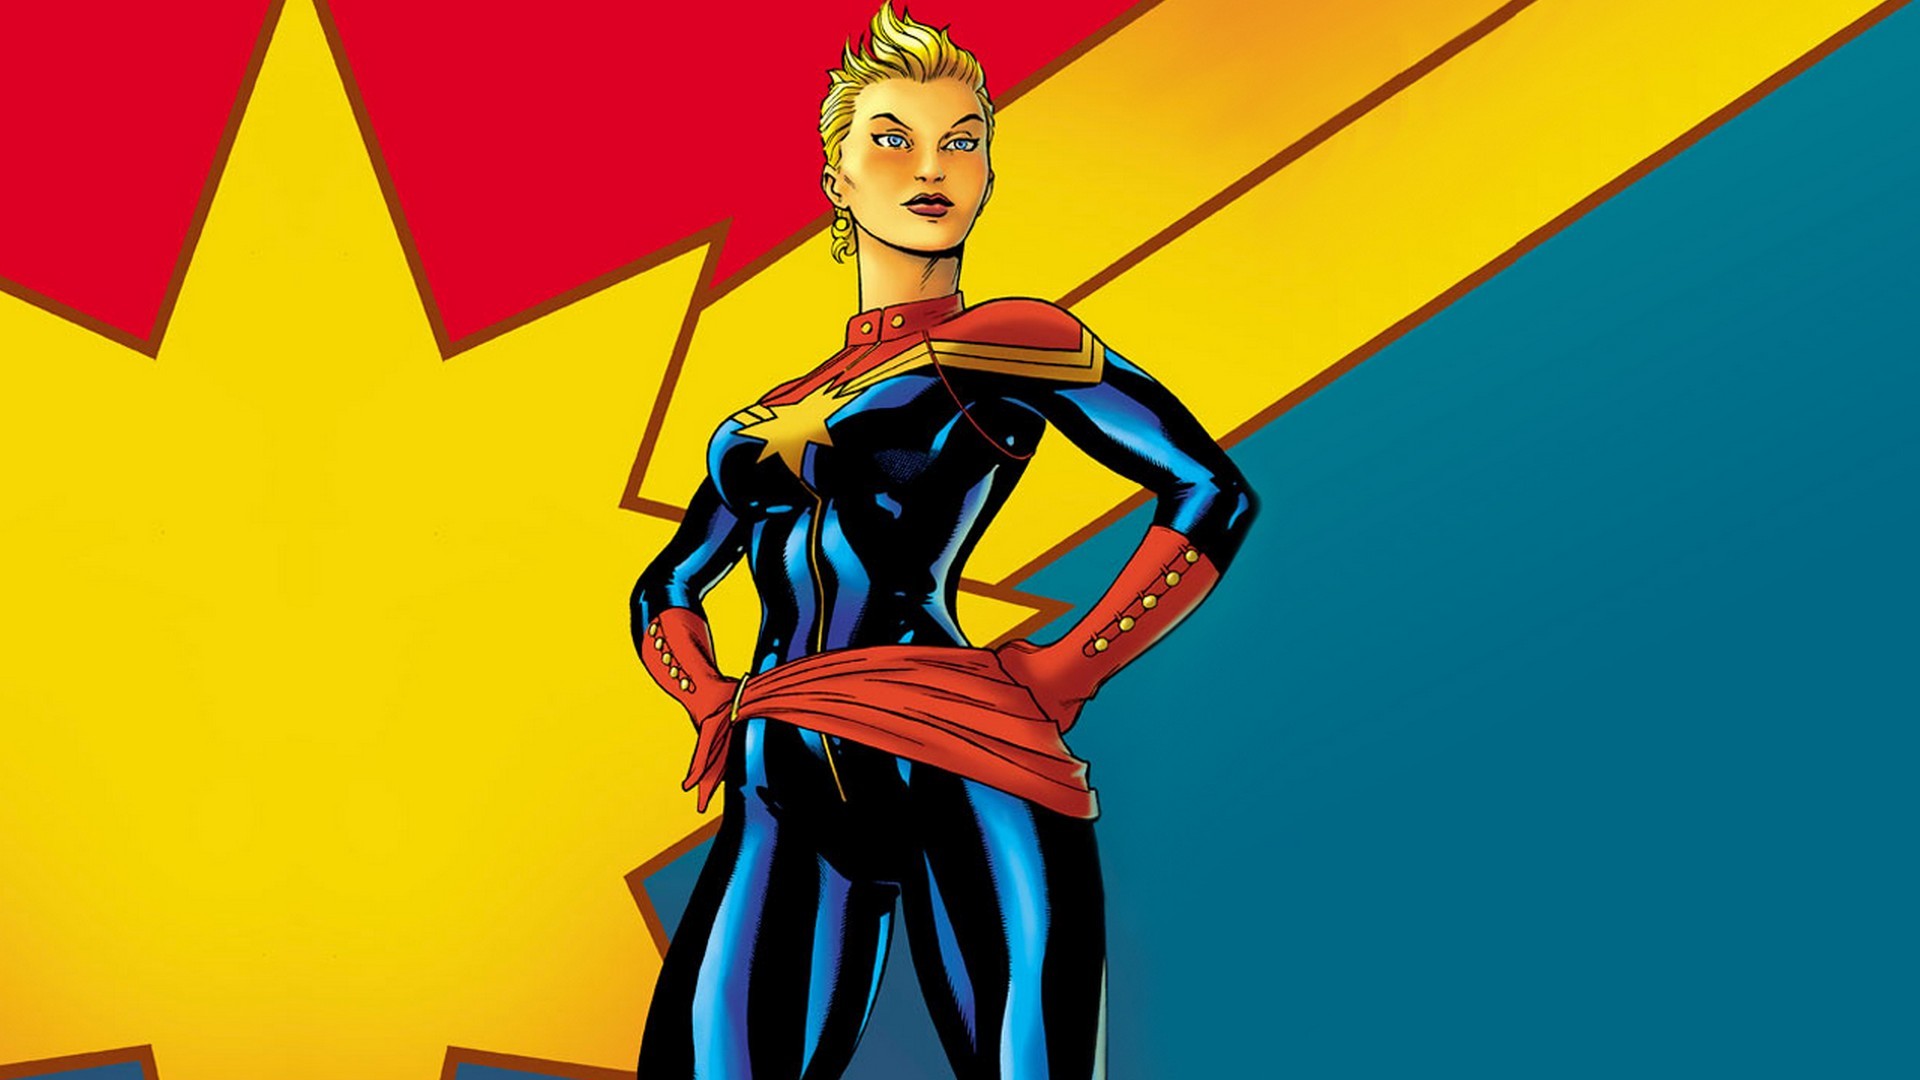 1920x1080 Captain Marvel Animated Full Movie Wallpaper with high-resolution   pixel. You can use